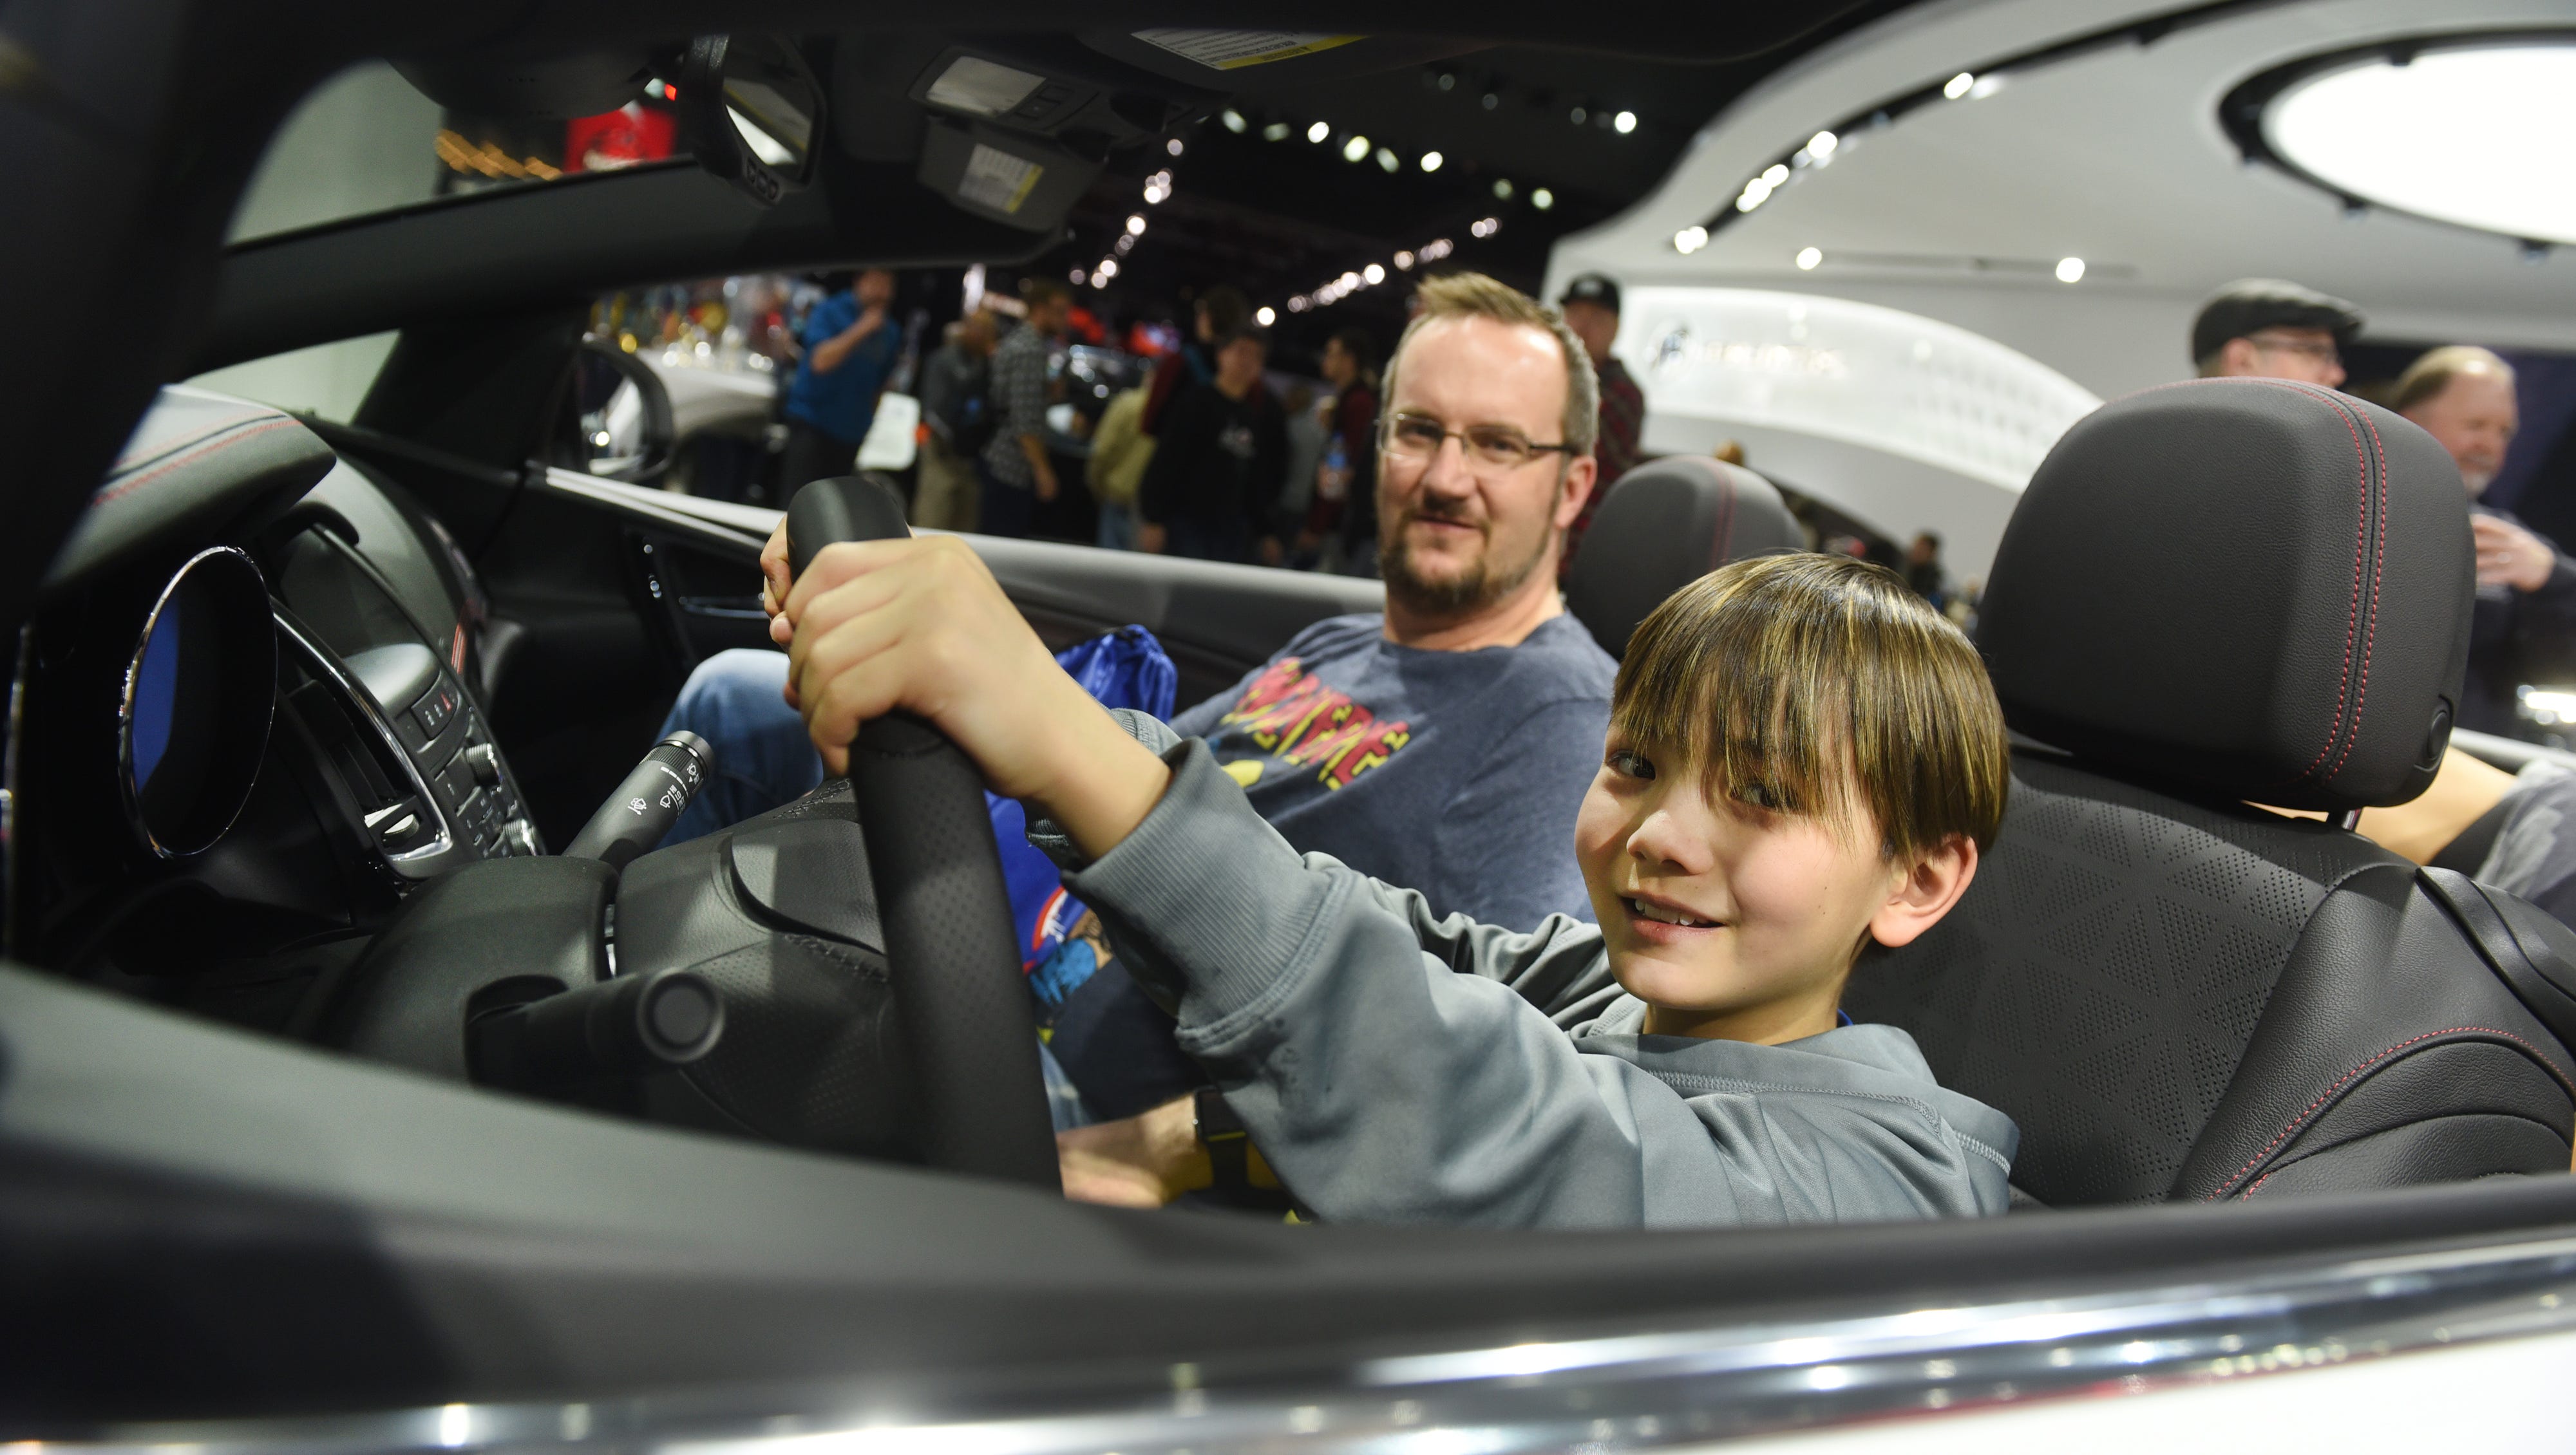 Dawson Brown, 11, of Warren , Ohio, sits in the driver's seat with his father Darrin in a 2018 Buick Cascada on Saturday January 20, 2018 for the first public day for the North American International Auto Show